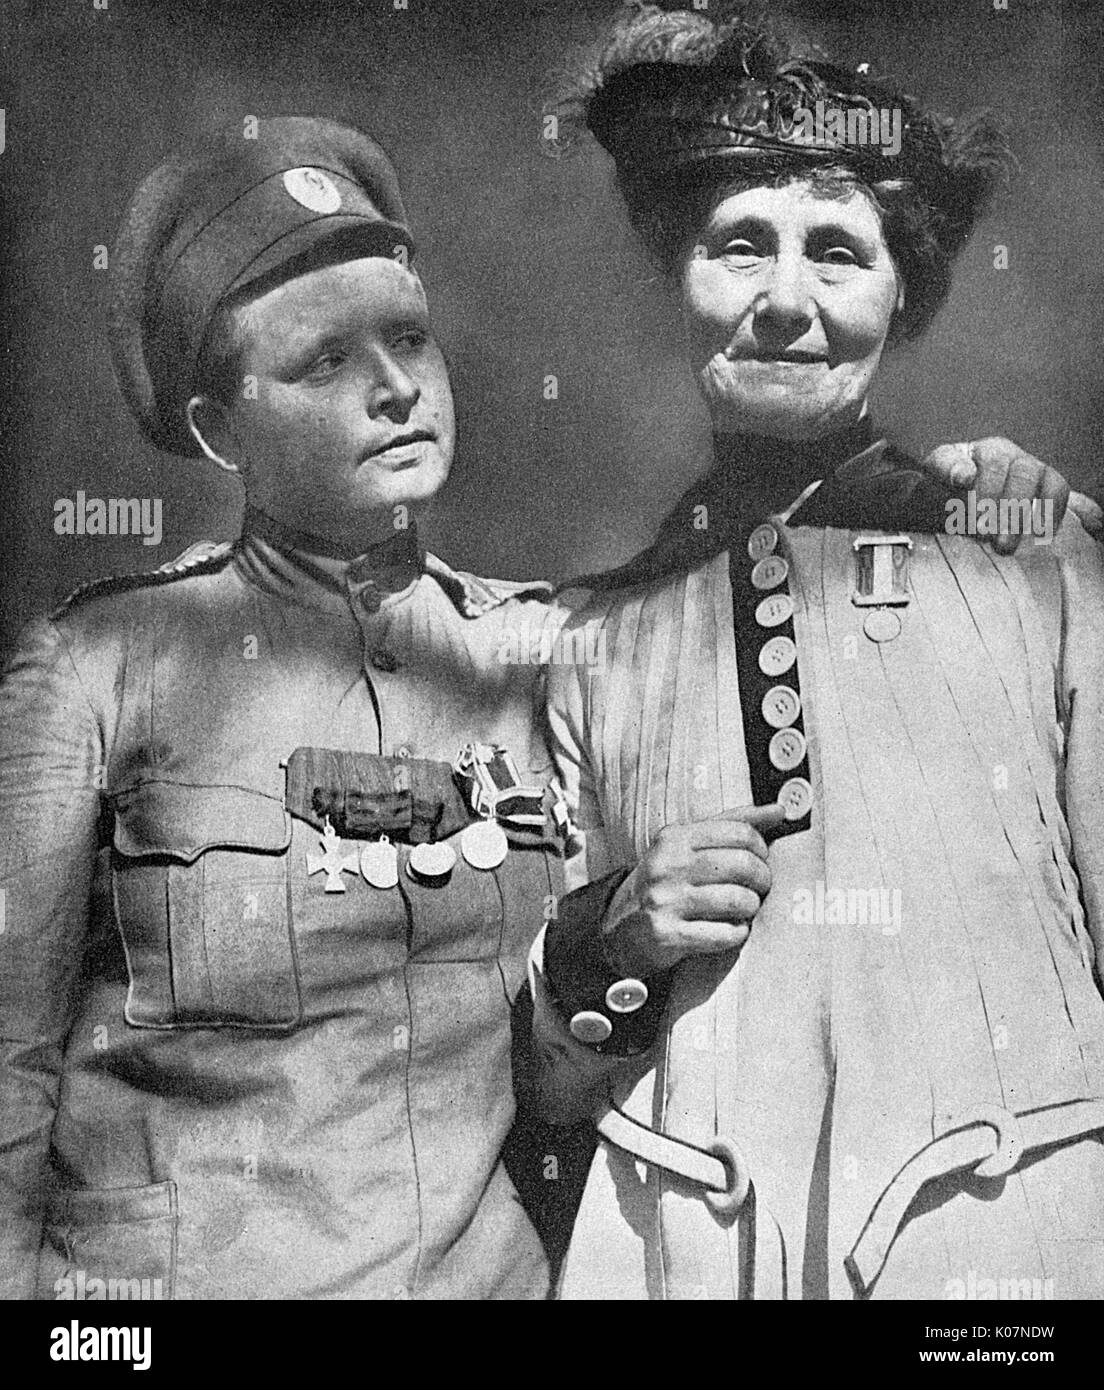 Mrs Emmeline Pankhurst (1858-1928), English founder and leader of the Women's Social and Political Union, and Maria Bochkareva (1889-1920), female Russian soldier who formed the Women's Battalion of Death and fought in the First World War. Two leaders of women together, during a visit by Mrs Pankhurst to Russia.      Date: 1917 Stock Photo